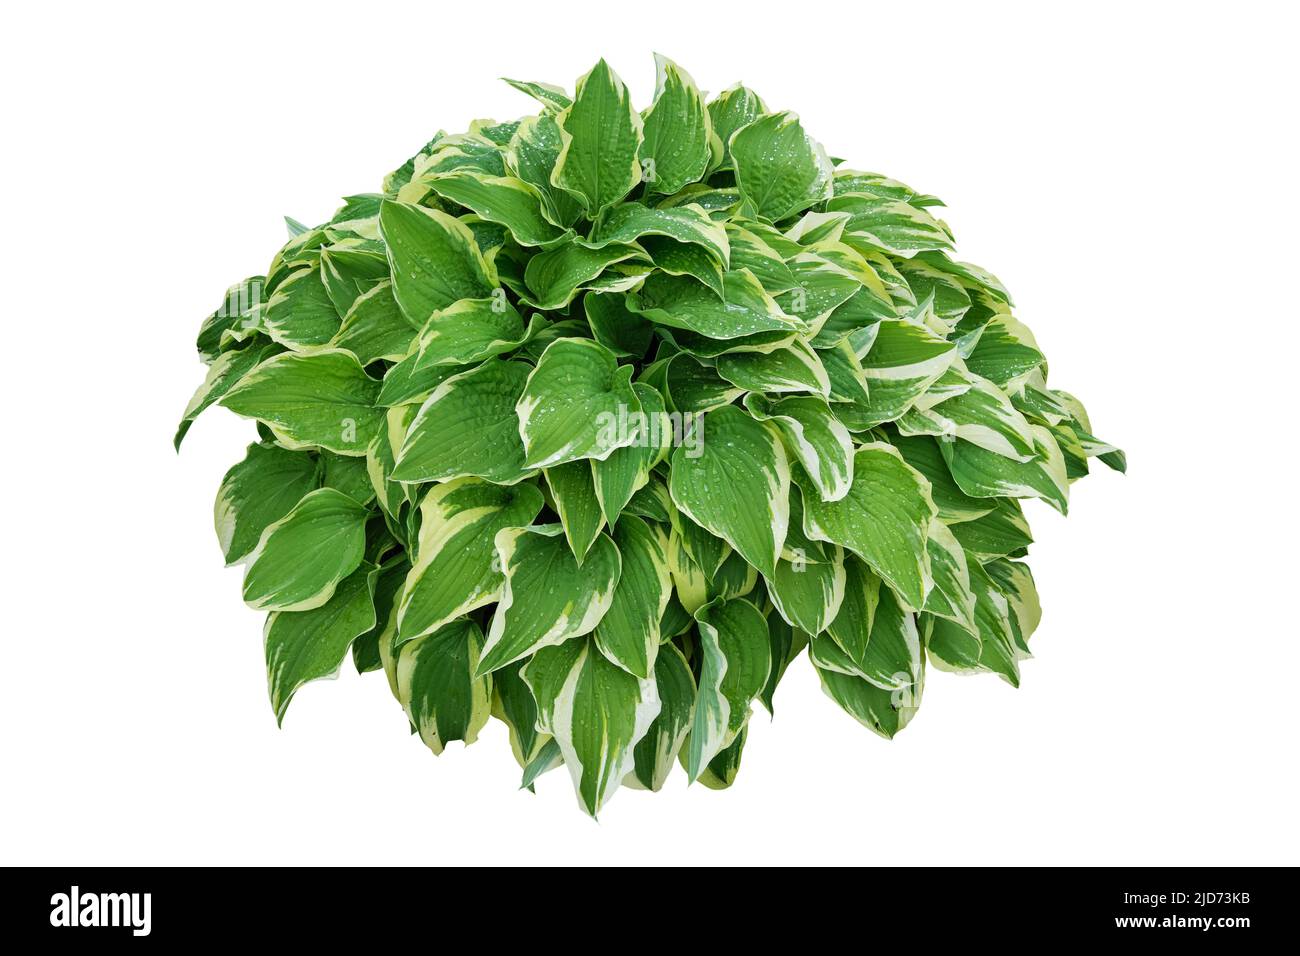 Hosta plant, plantain lily, isolated on white background. Stock Photo